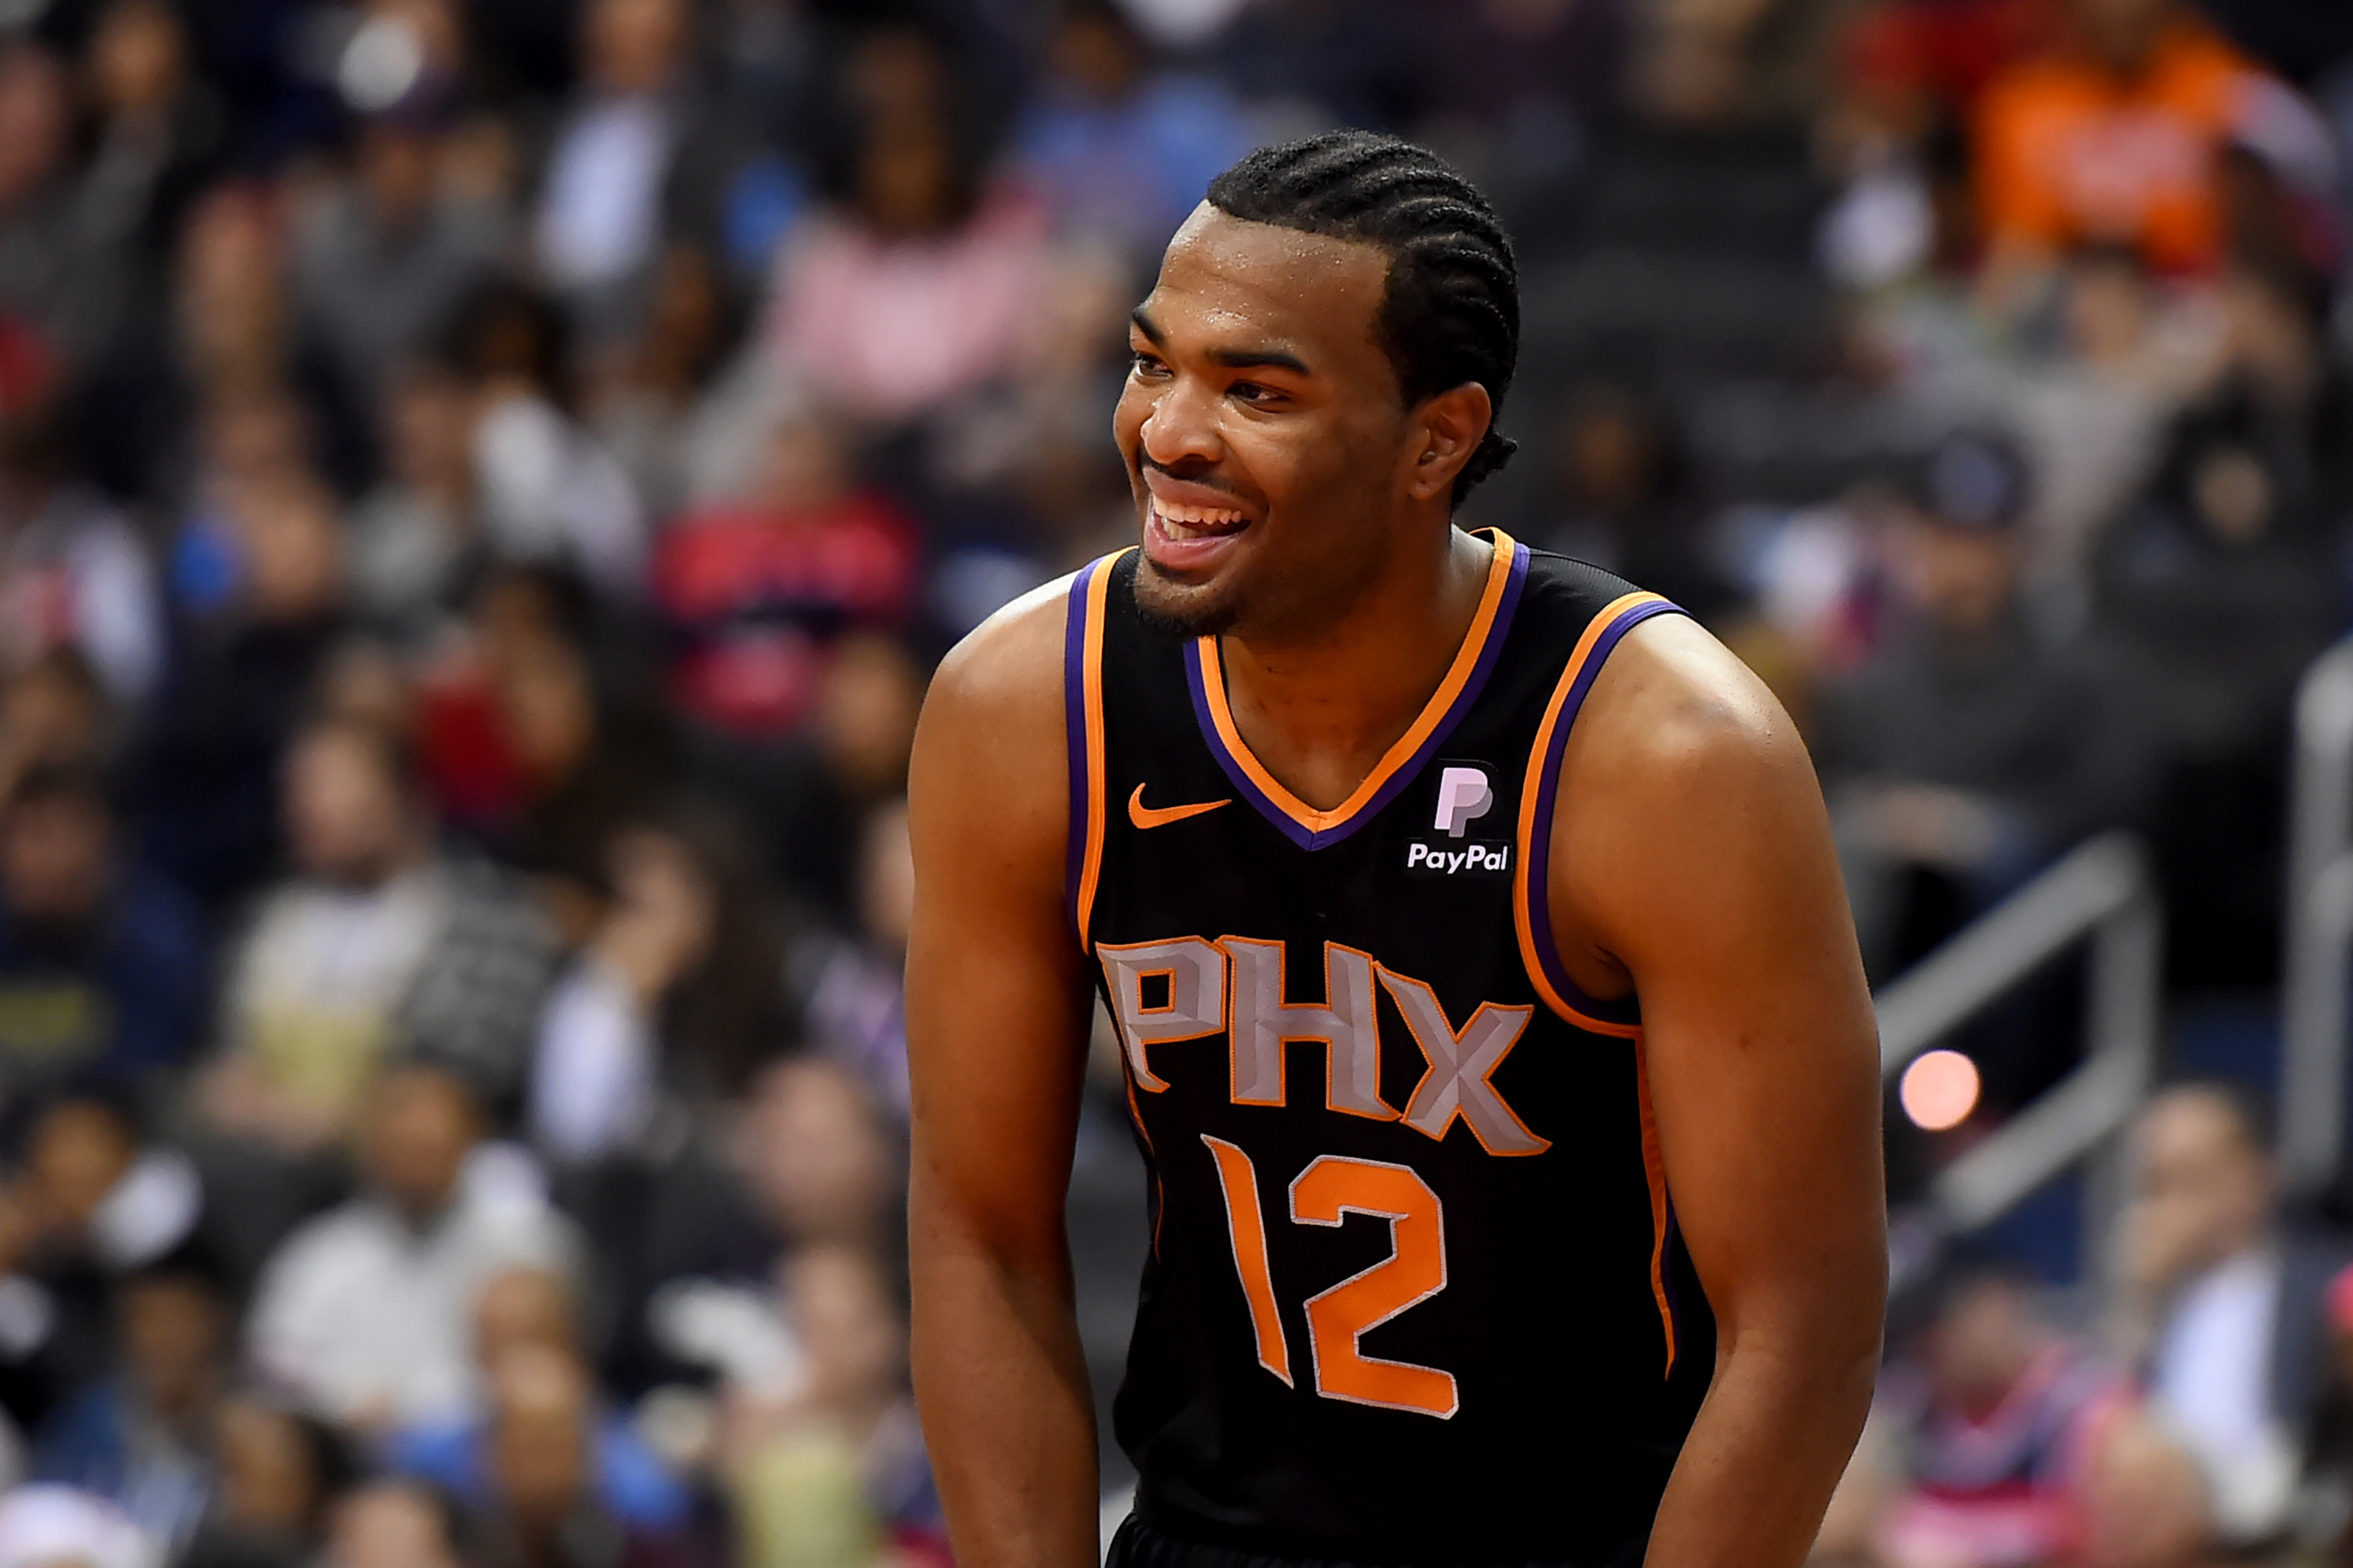 Phoenix Suns forward T.J. Warren to miss 2-3 weeks with ankle injury